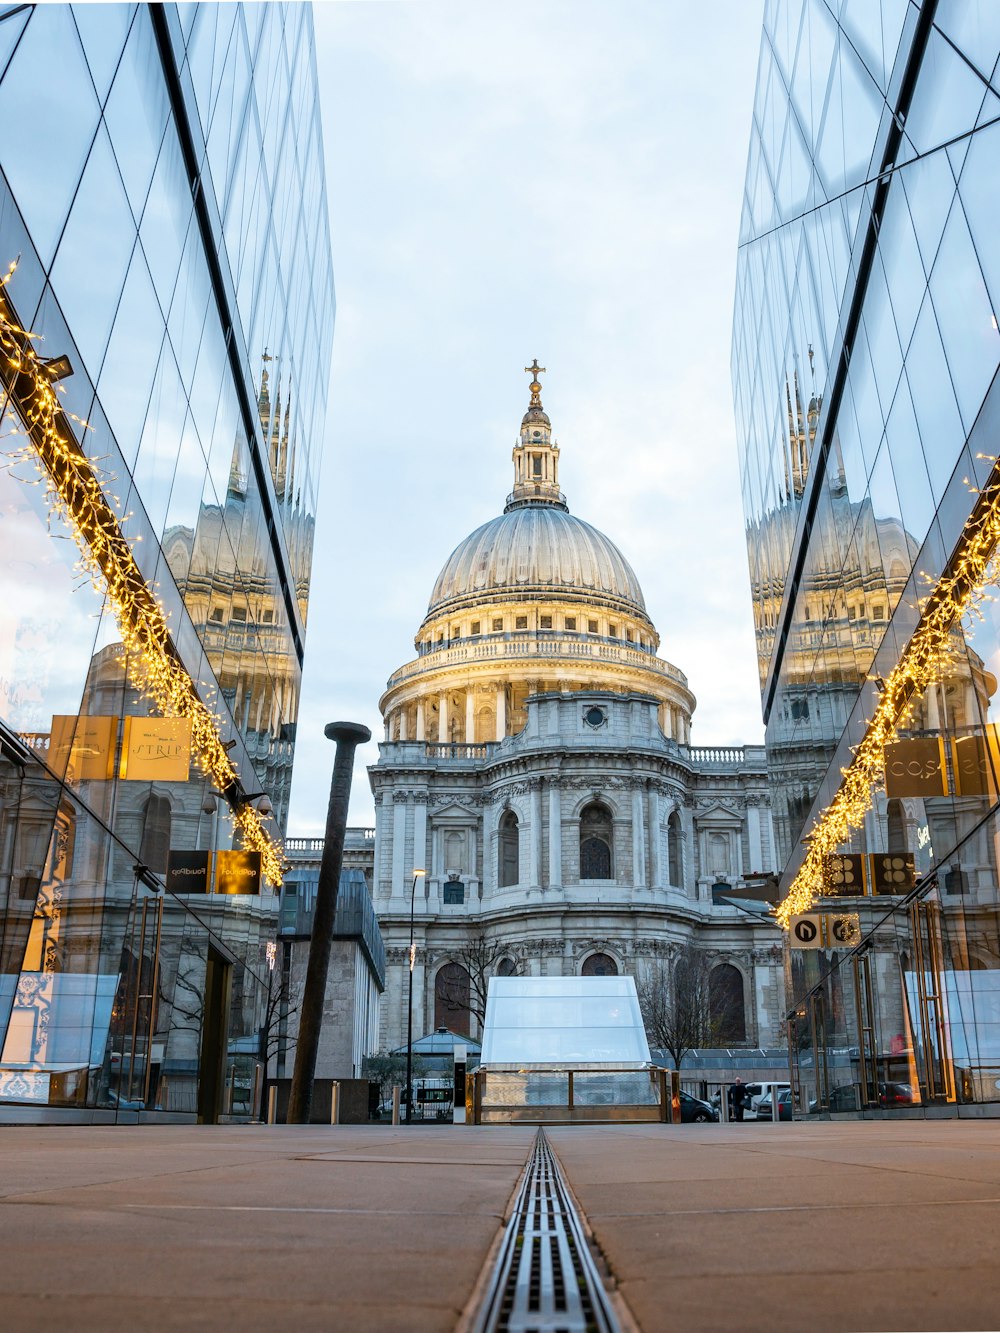 the reflection of the dome of st paul's cathedral in the windows of another